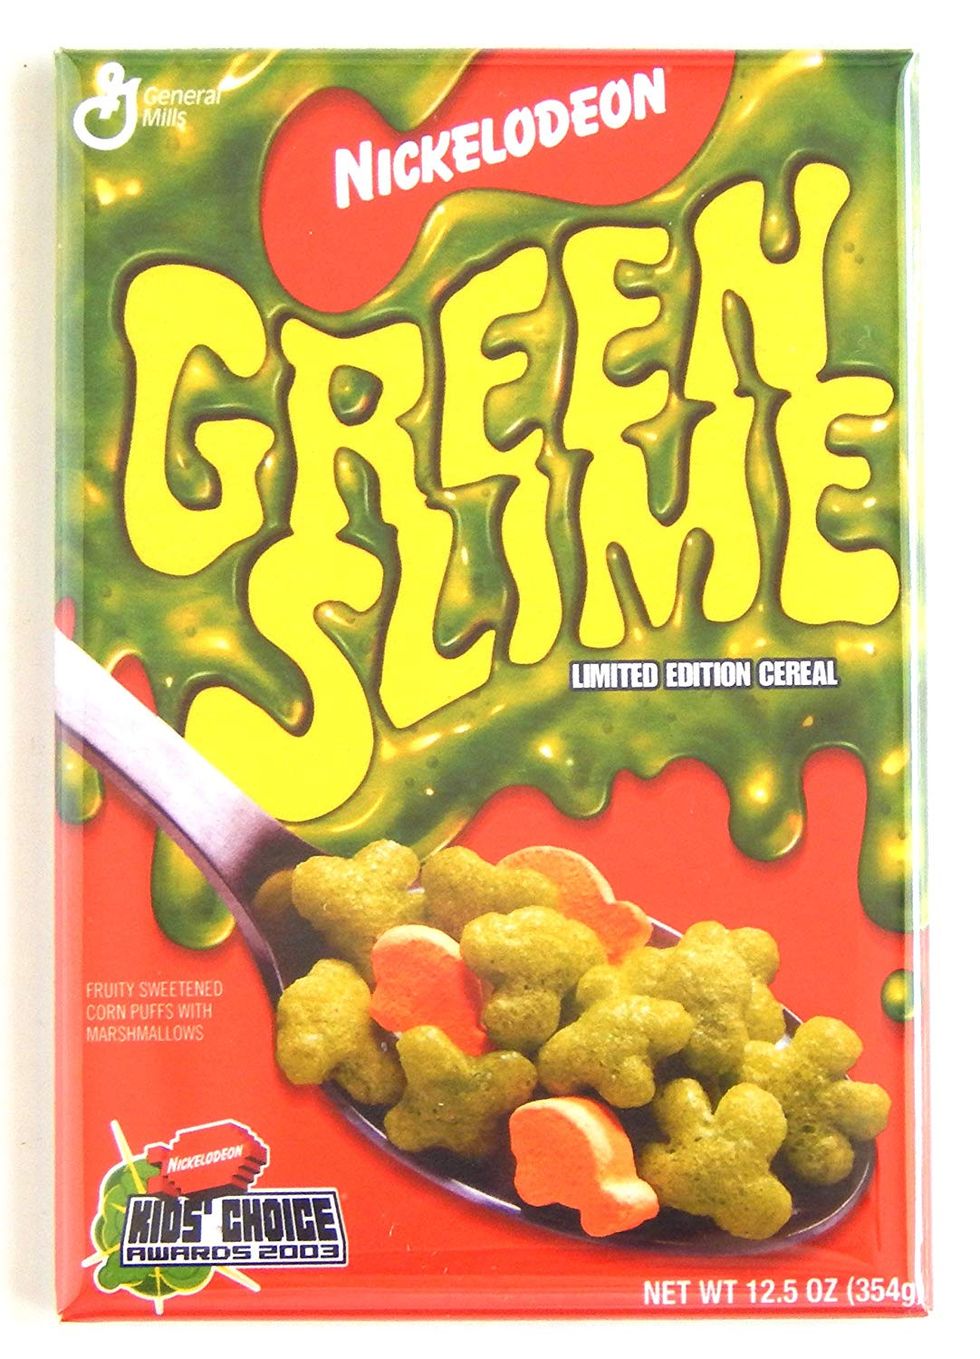 Nickelodeon Slime Facts Green Slime Cereal